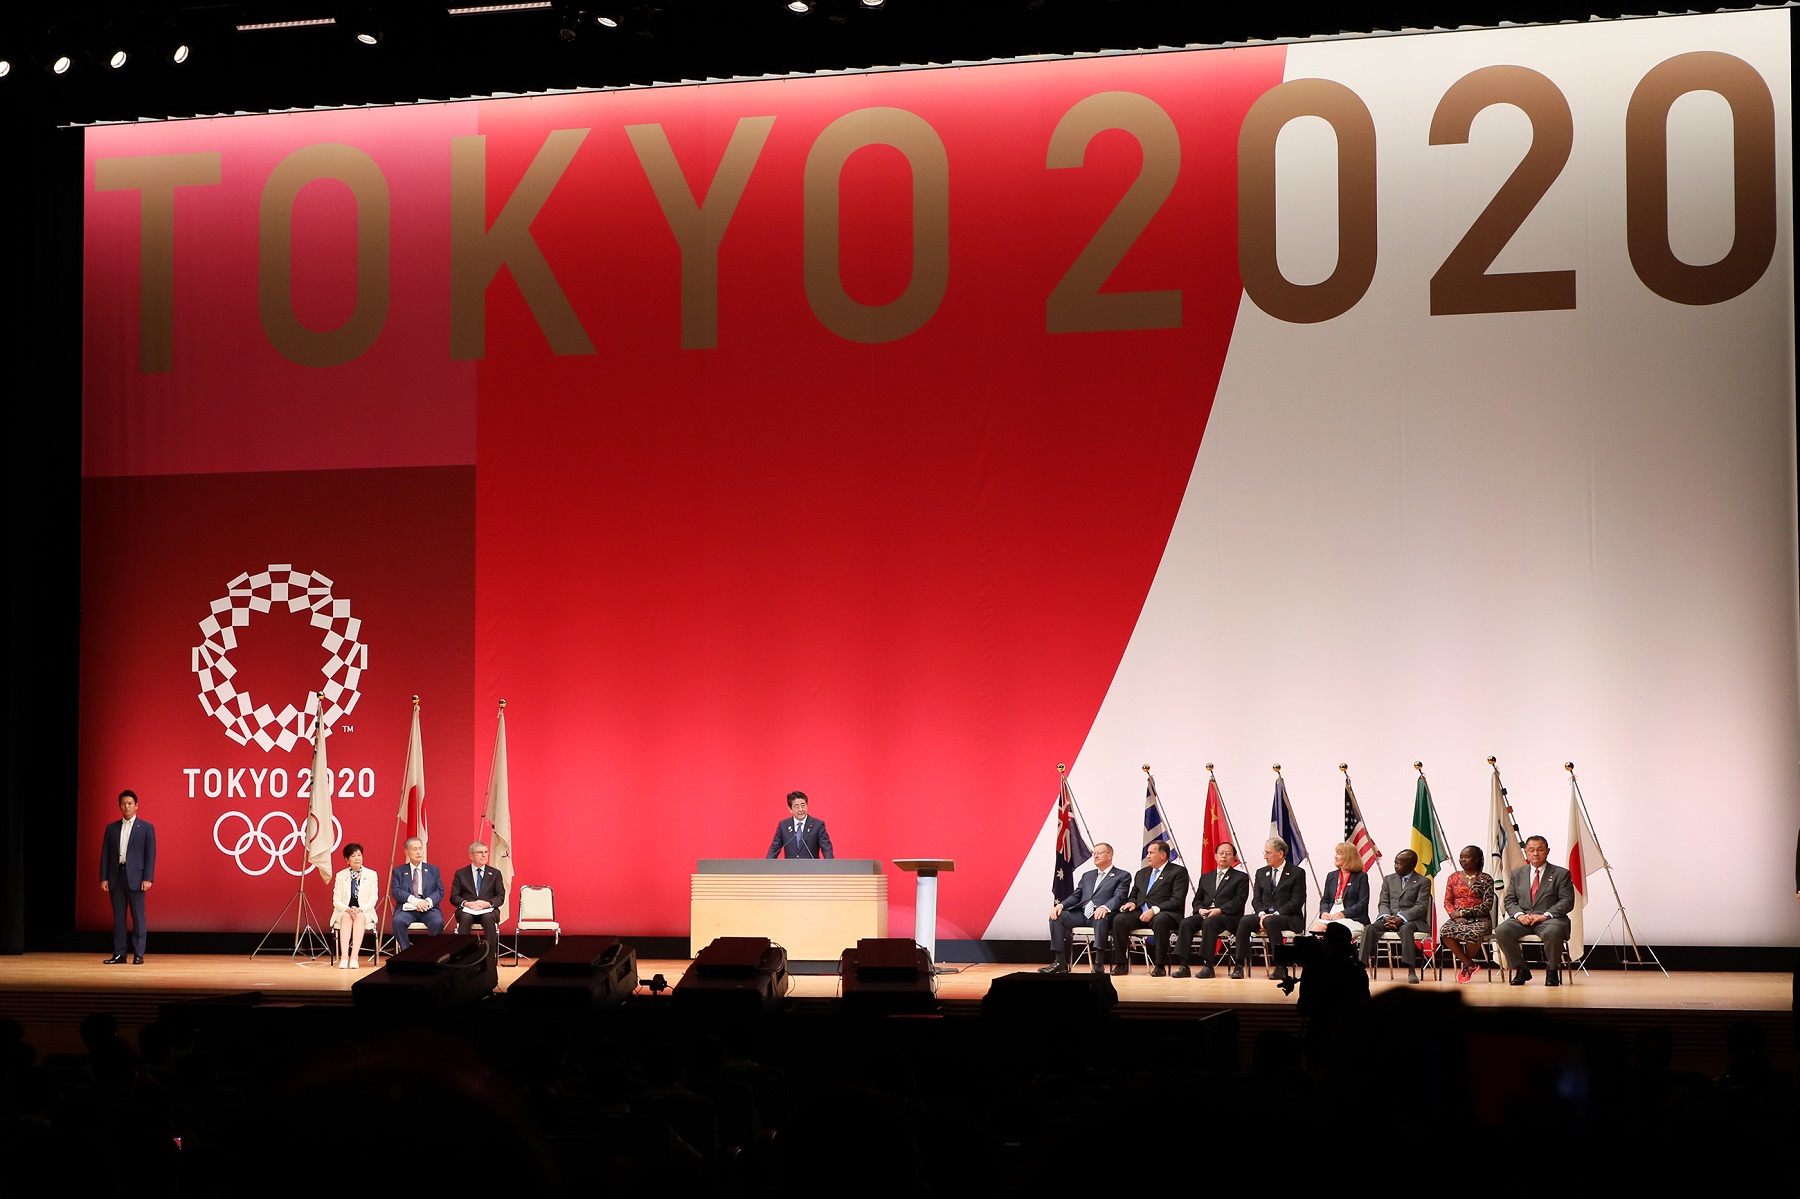 Photograph of the Prime Minister delivering an address at the “1 Year to Go!” Ceremony for the Tokyo 2020 Olympic Games (2)